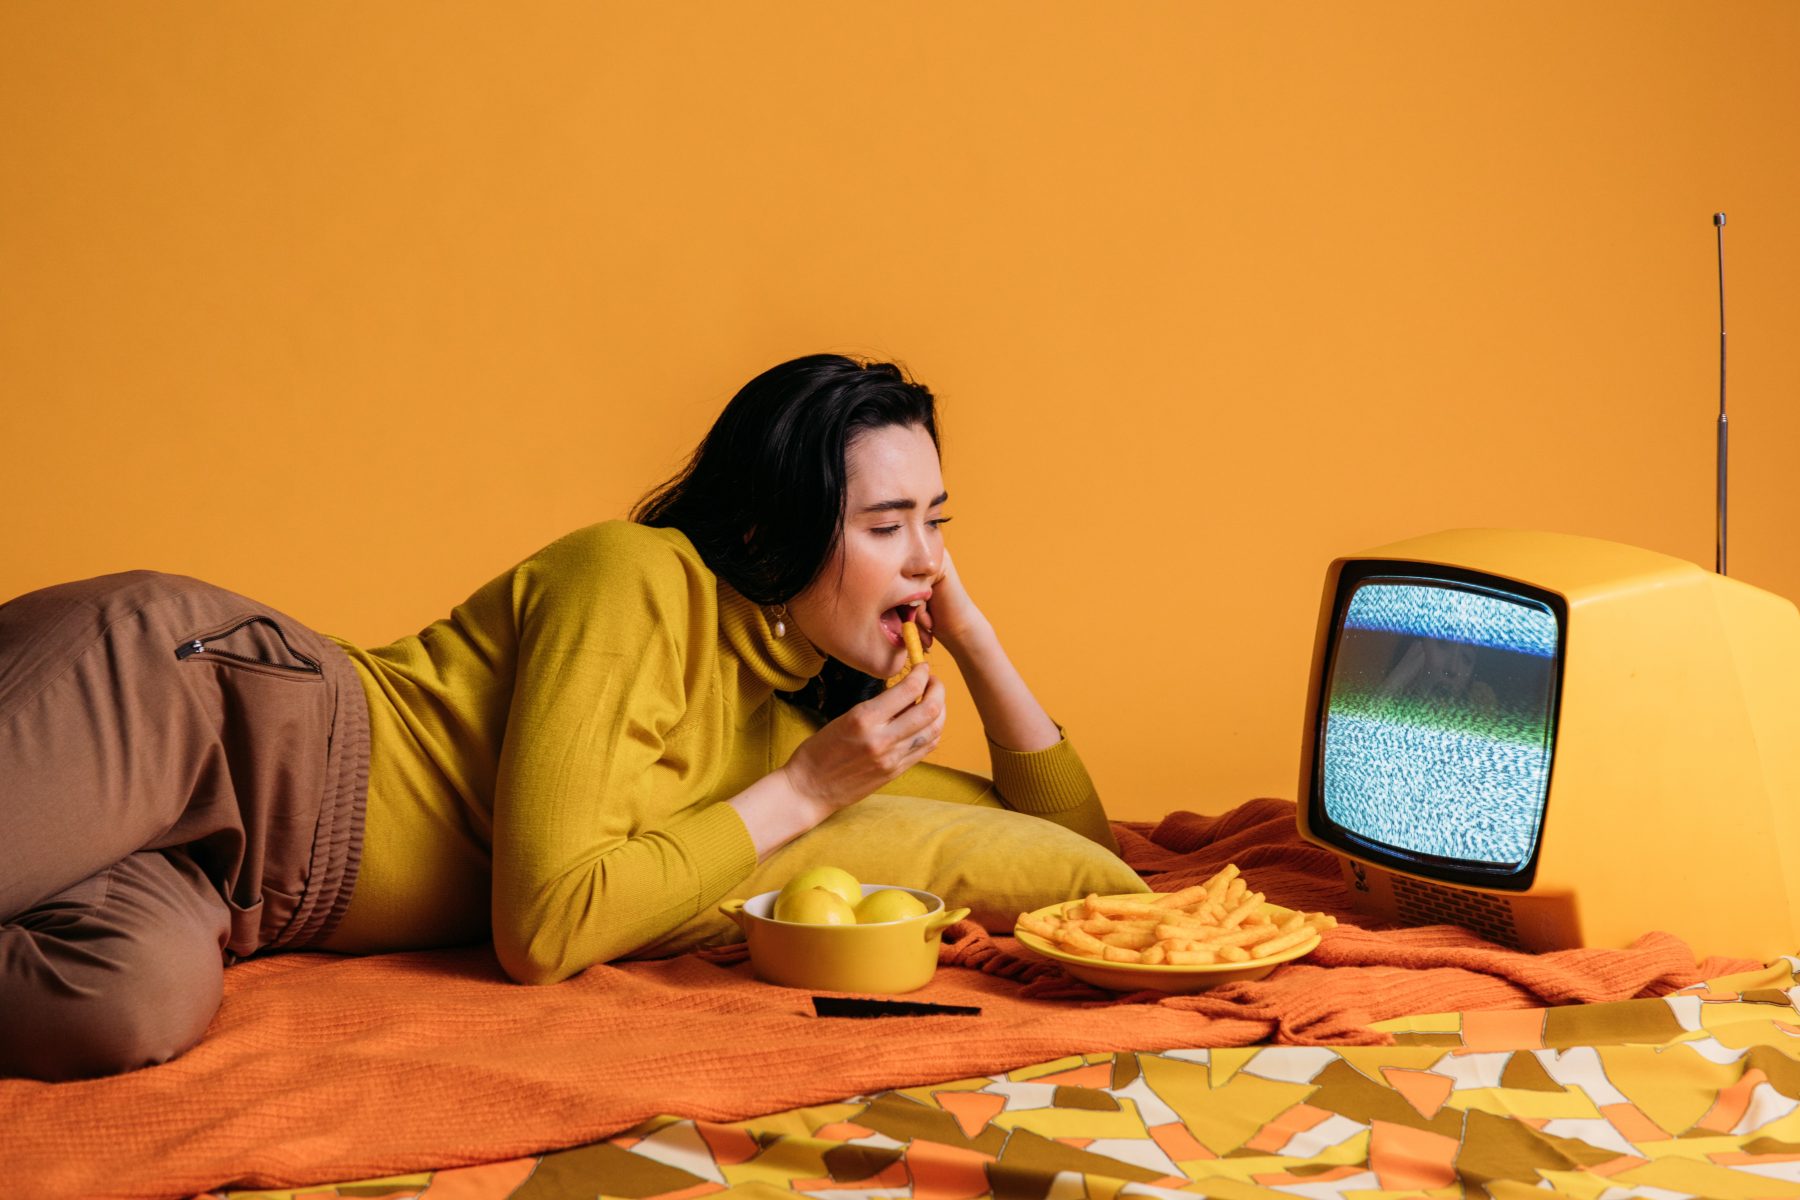 A woman binge eating while she watched TV.